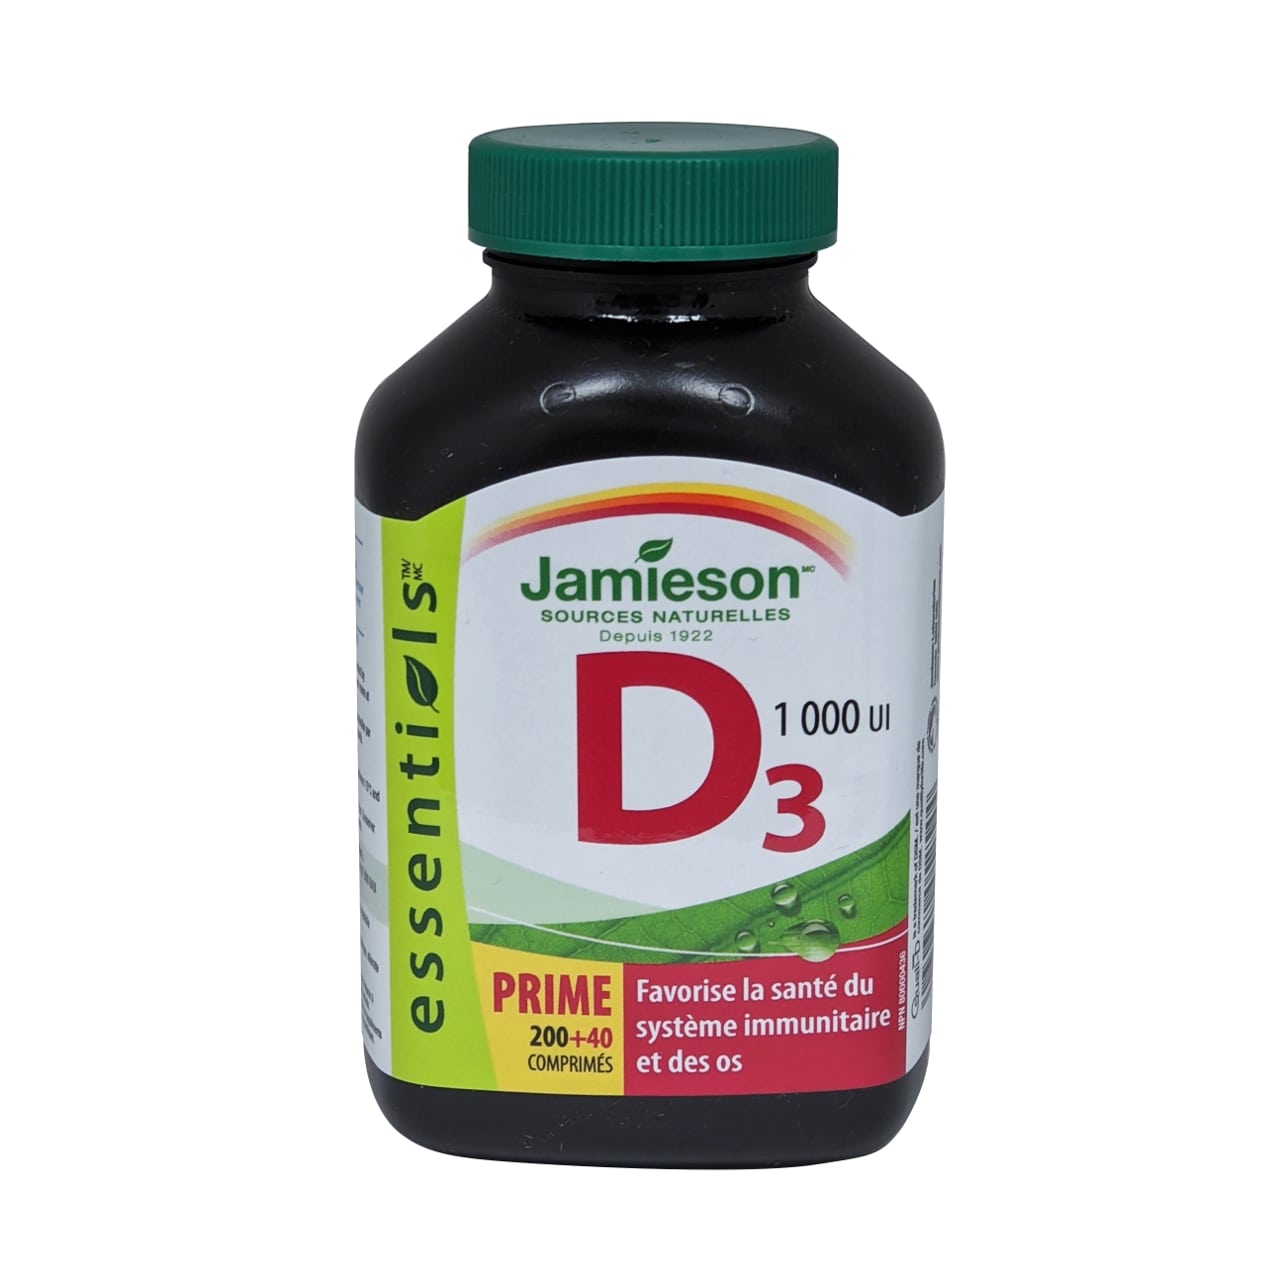 Product label for Jamieson Vitamin D3 1000 IU in French